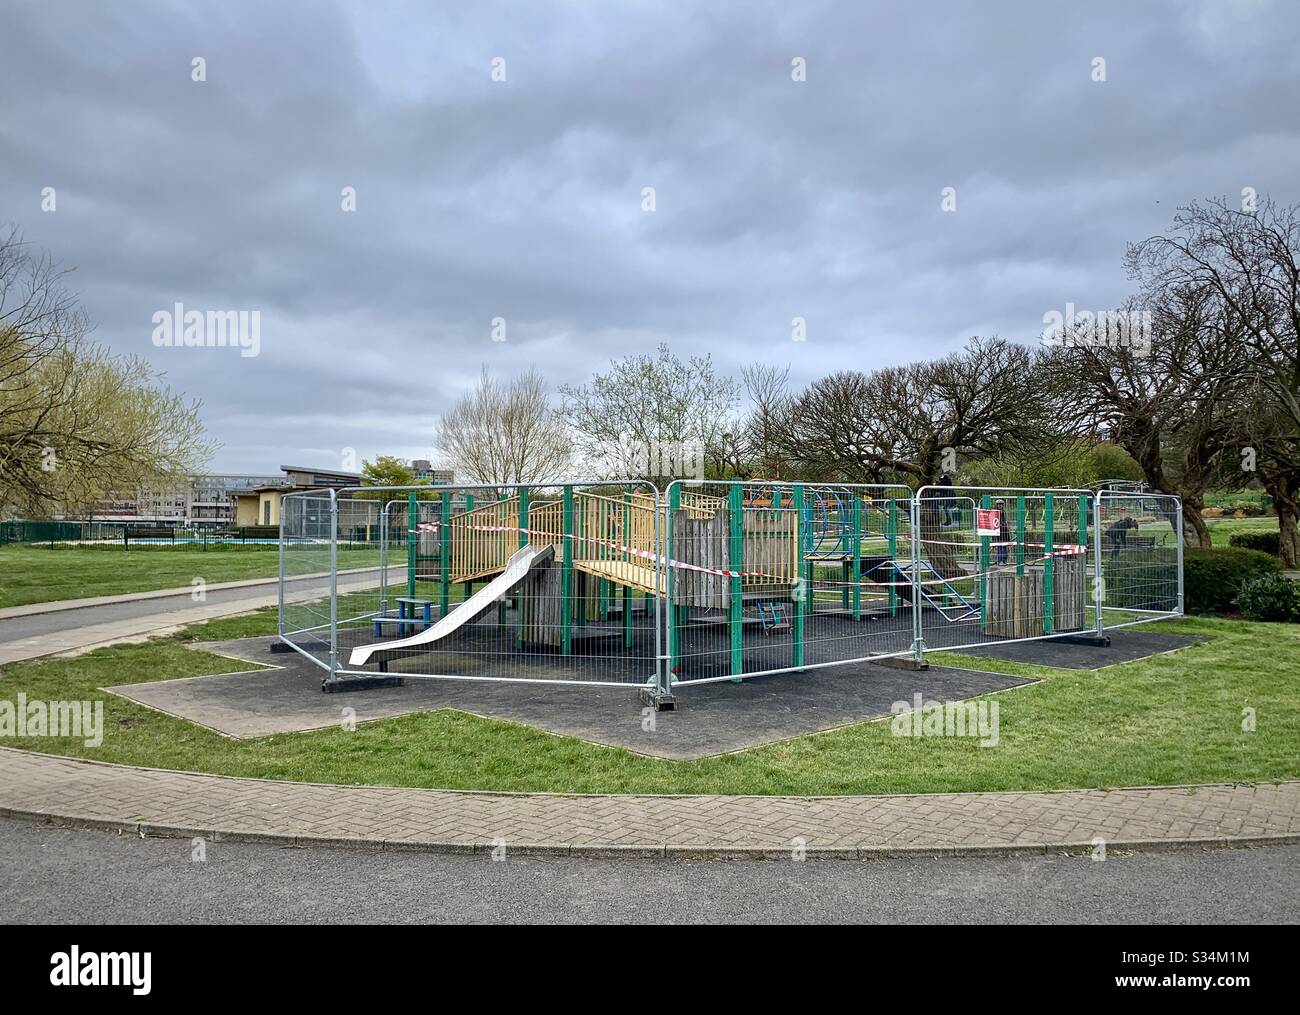 Metal fencing around children’s play equipment in a London park Stock Photo